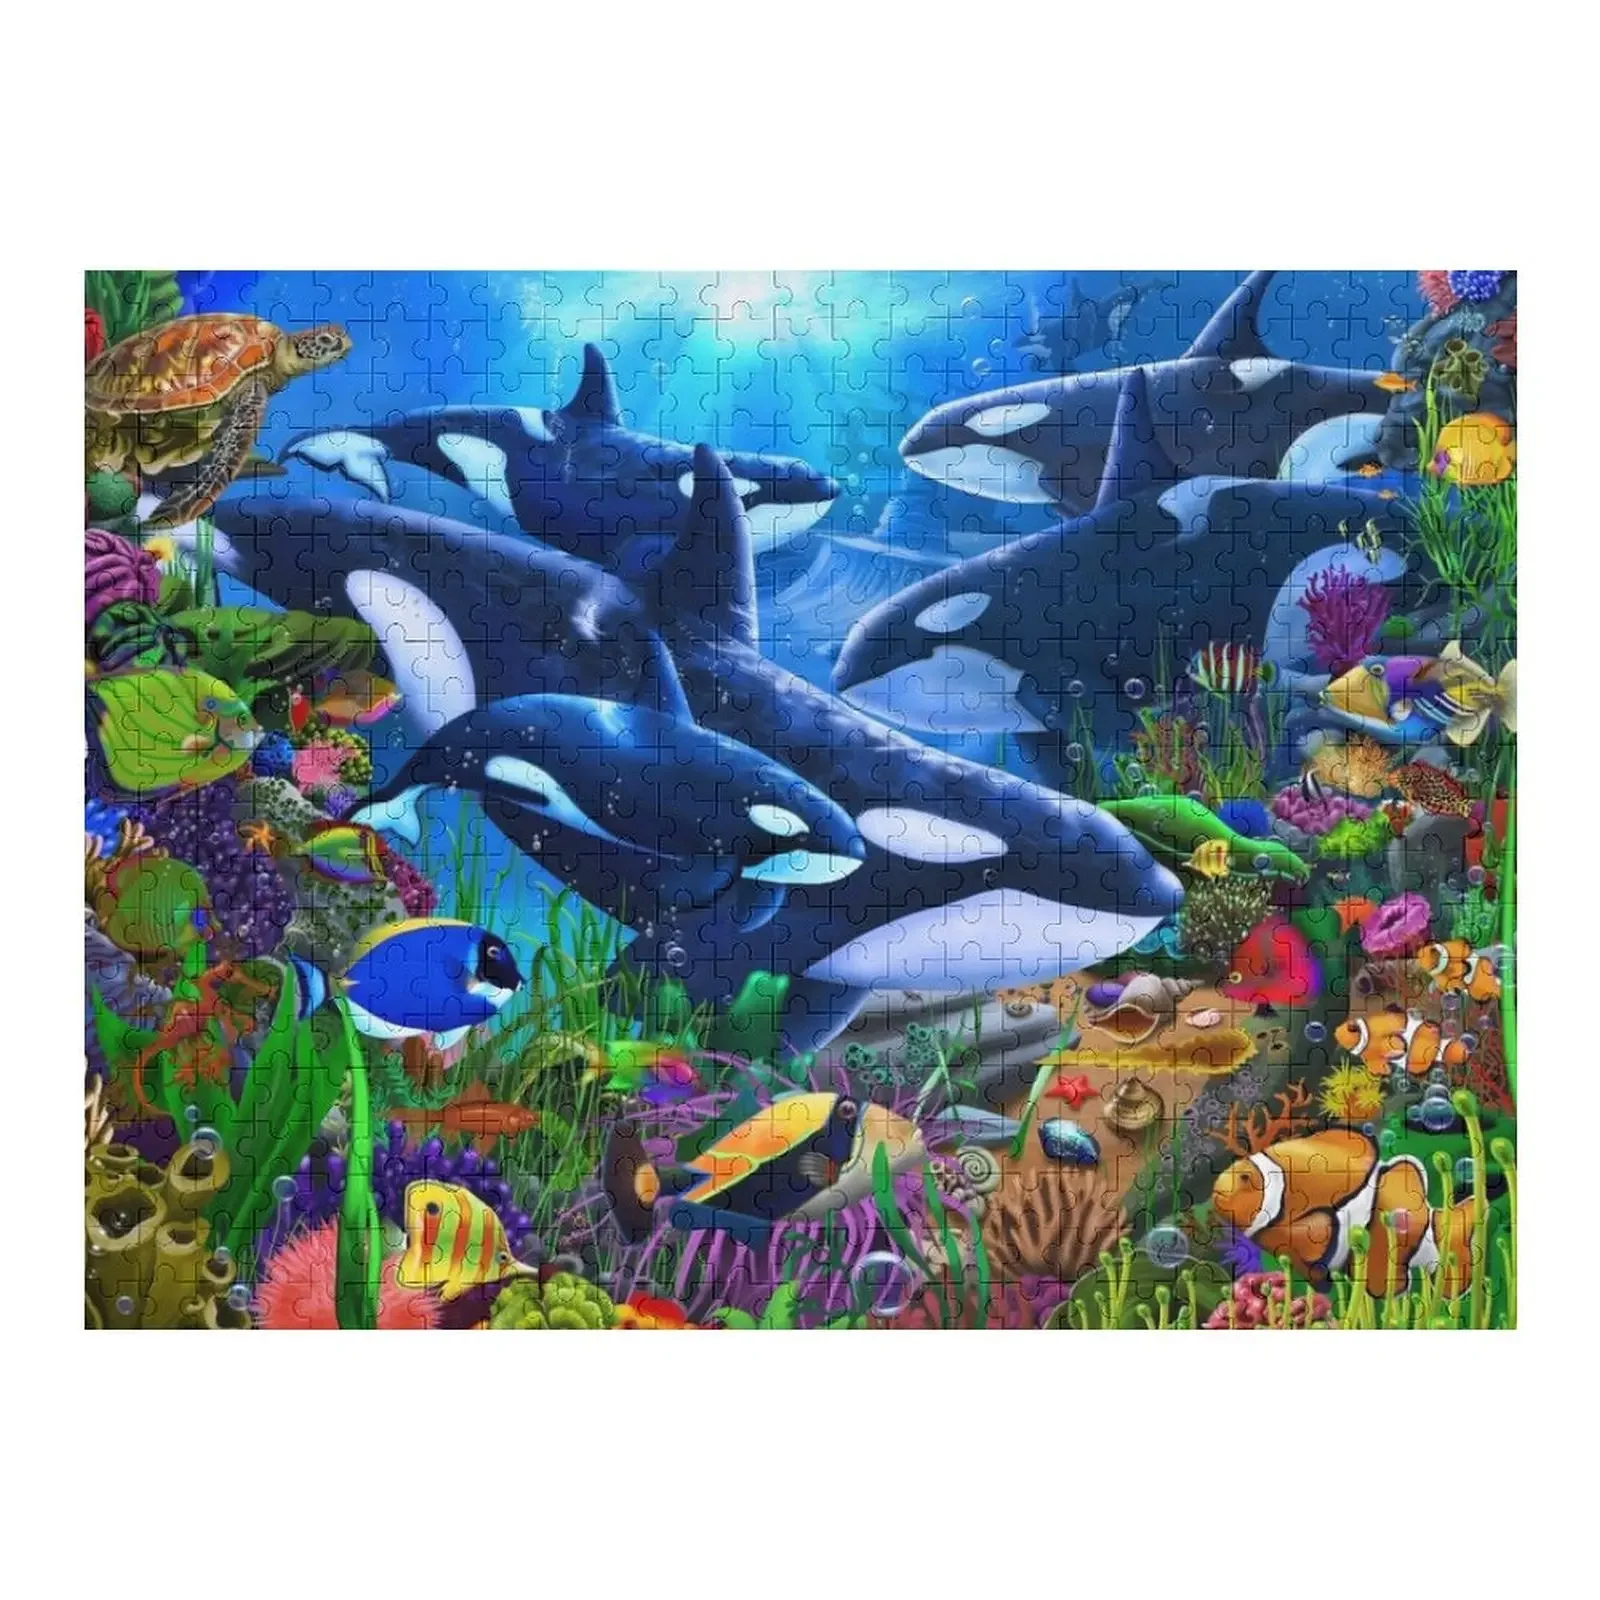 Orca's Ocean Domain Jigsaw Puzzle Wood Animals Baby Toy Customs With Photo Puzzle chaos domain